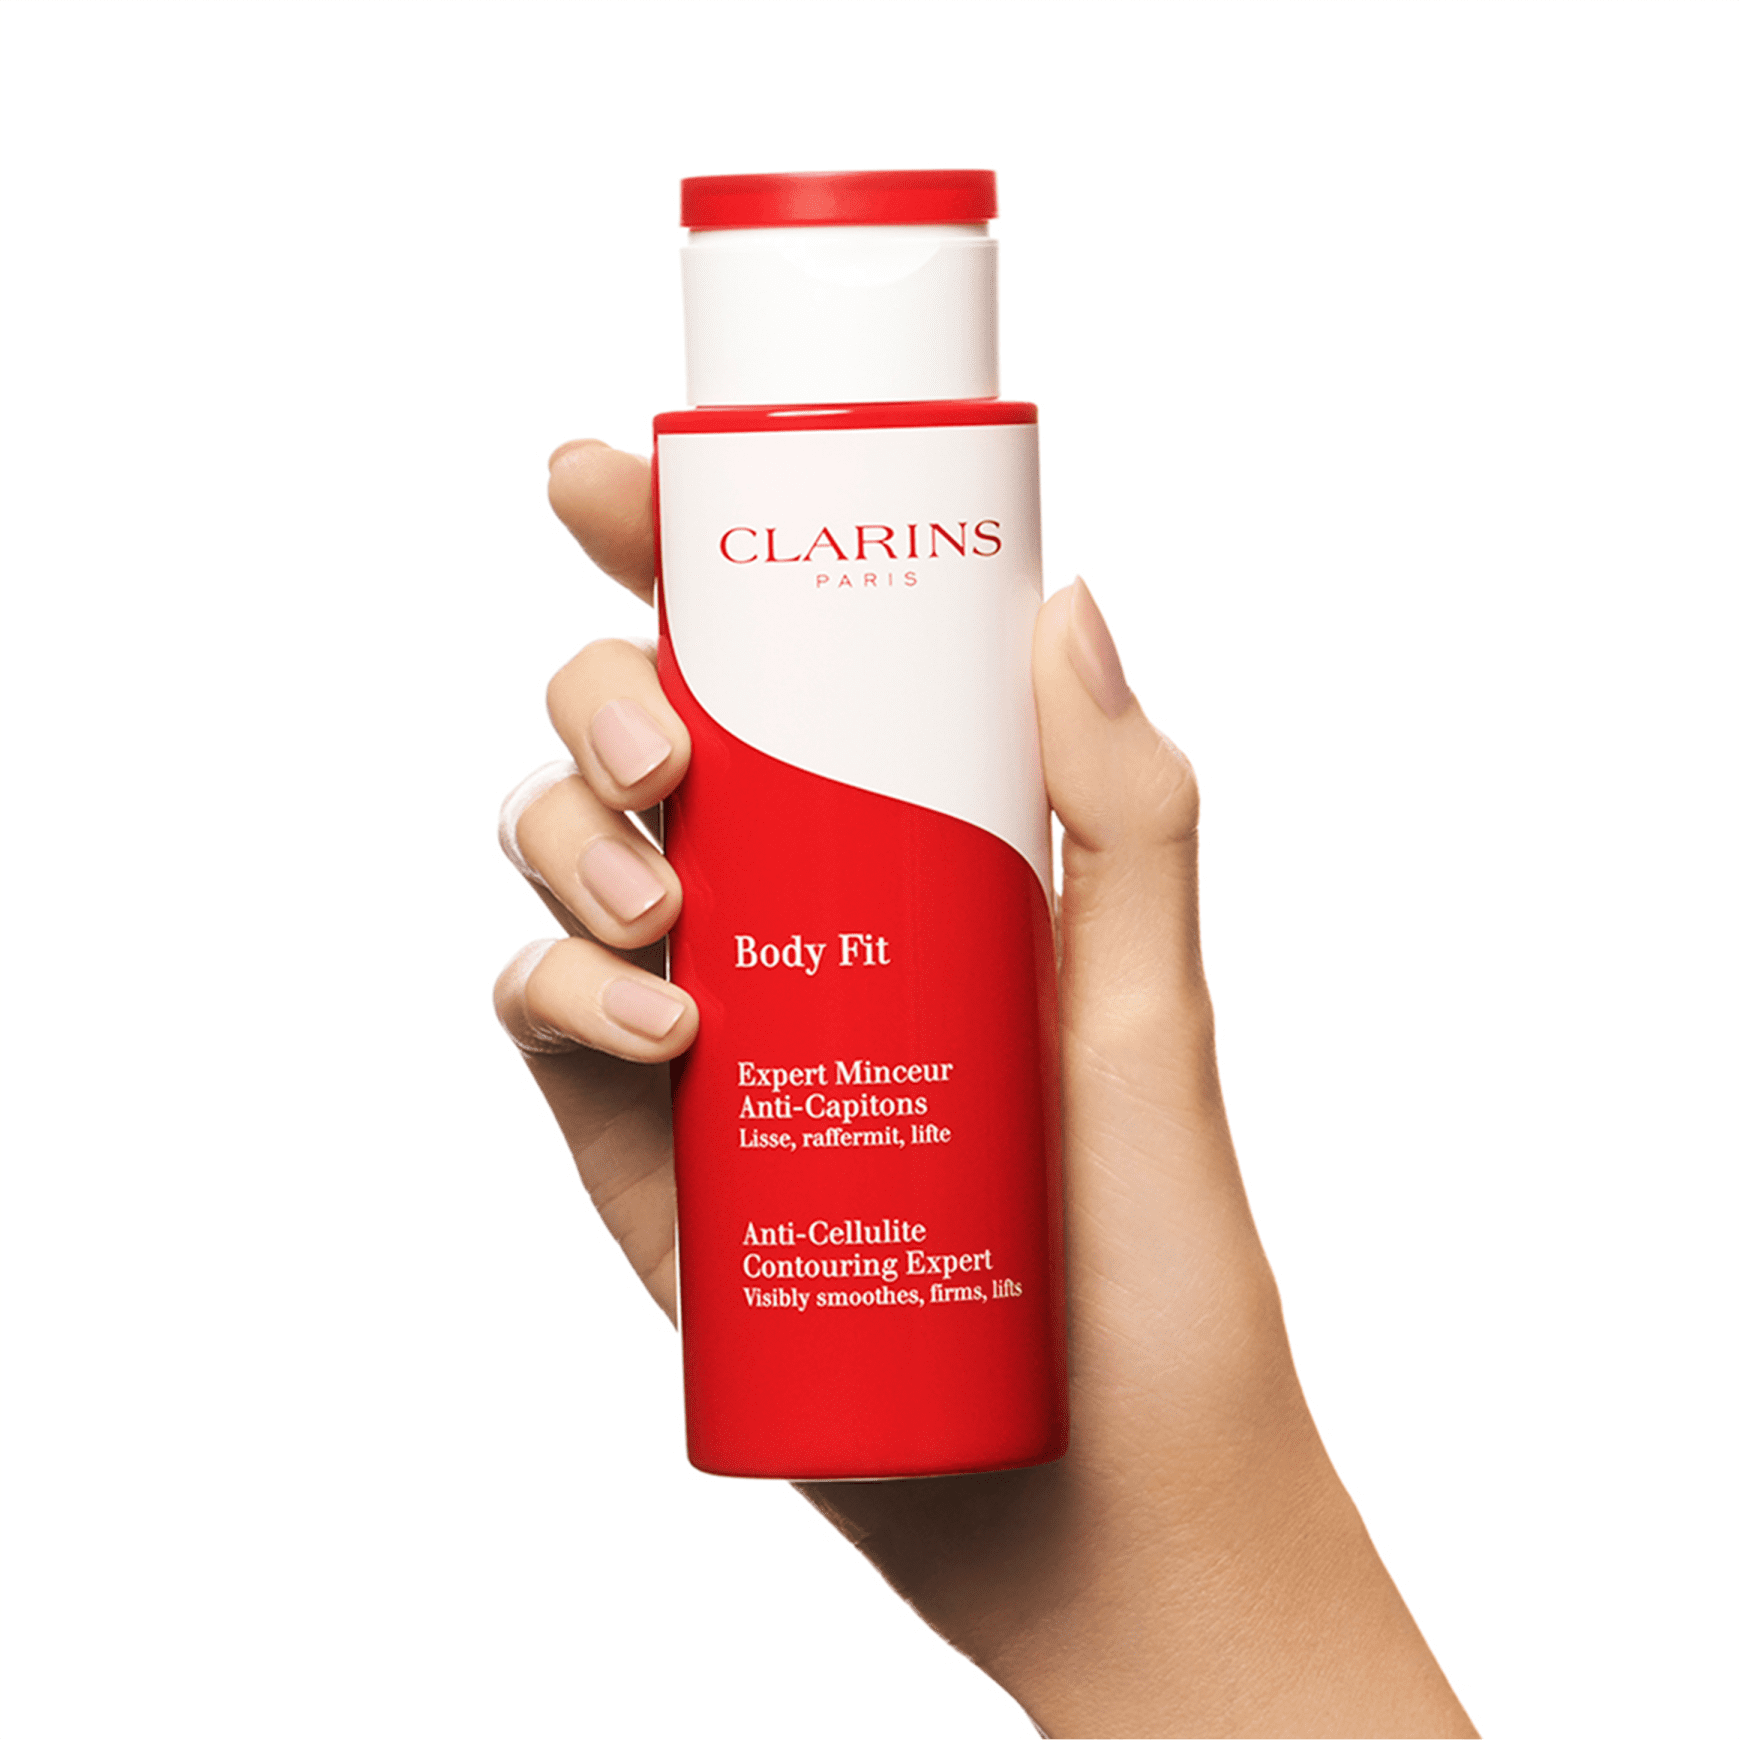 Clarins Body Fit Anti-Cellulite Contouring Expert creme corporal